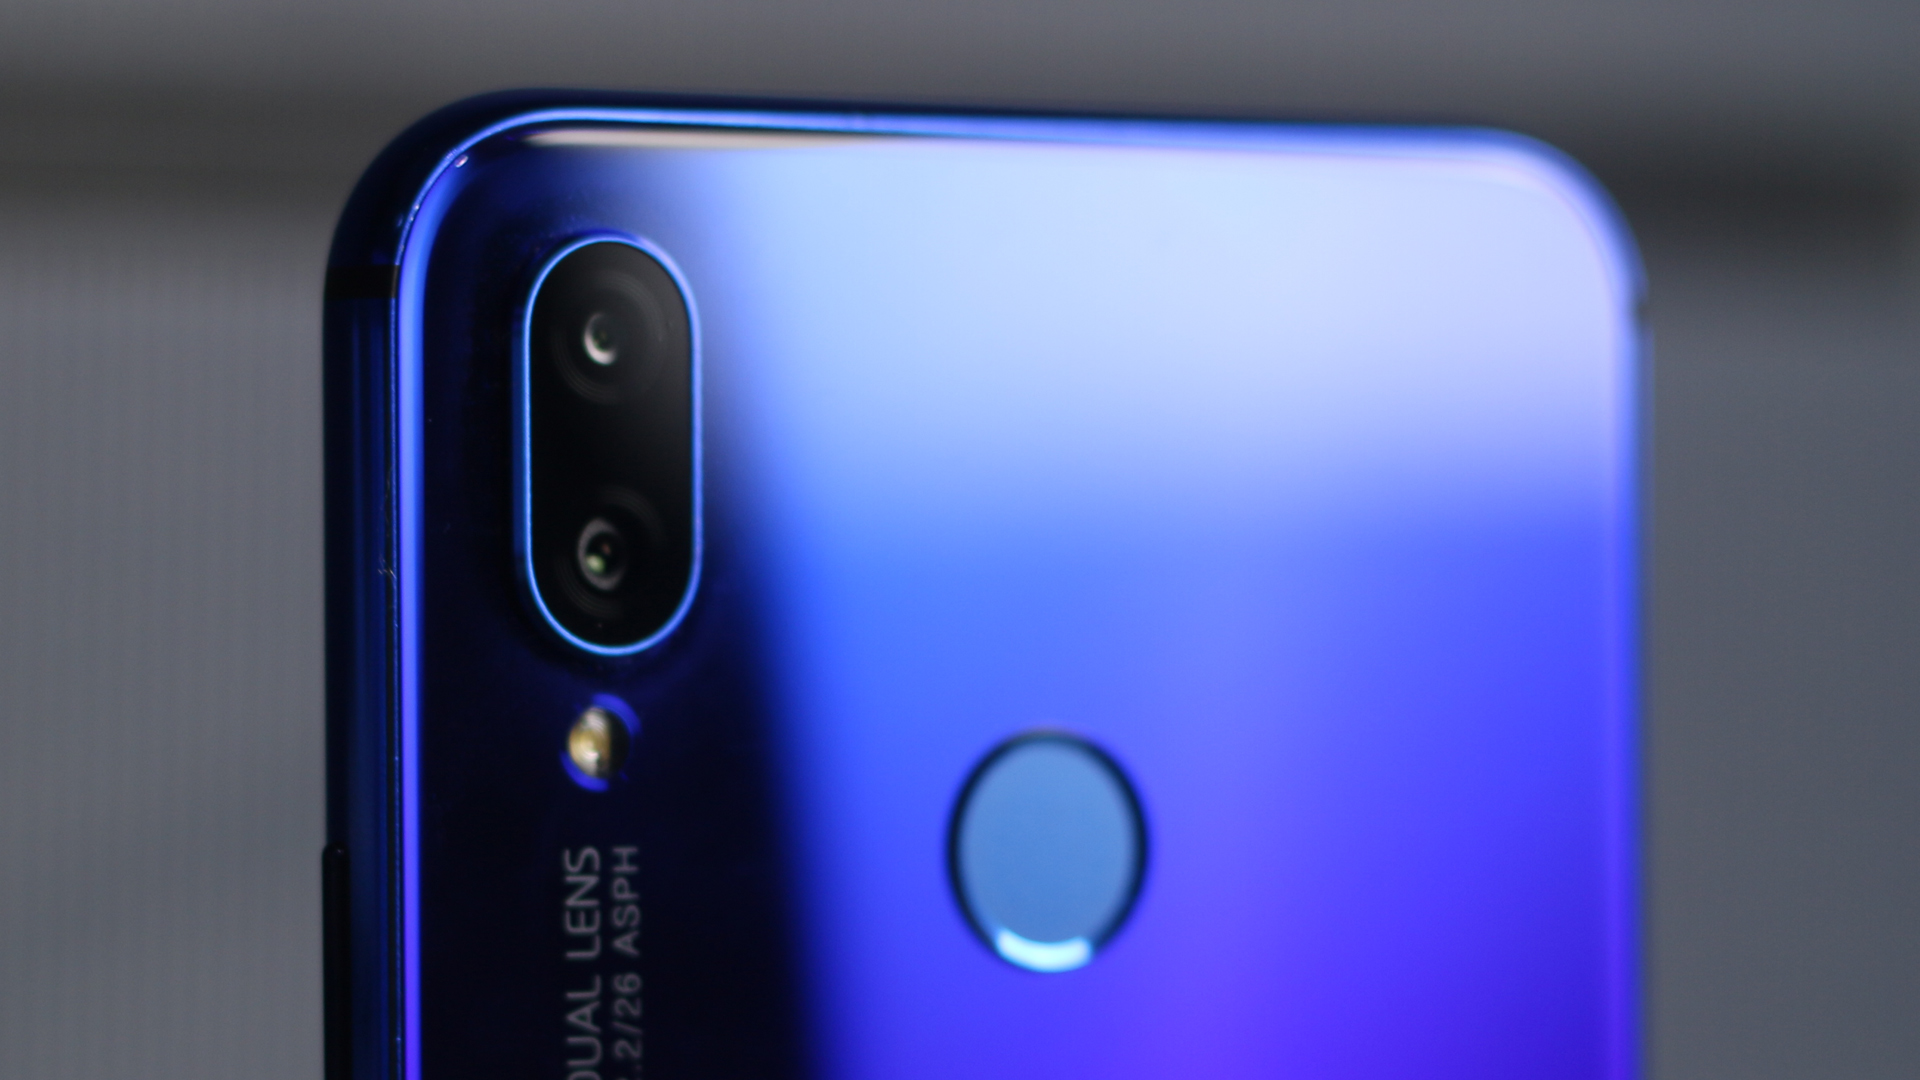 The Huawei Nova 3i is Now More Affordable!